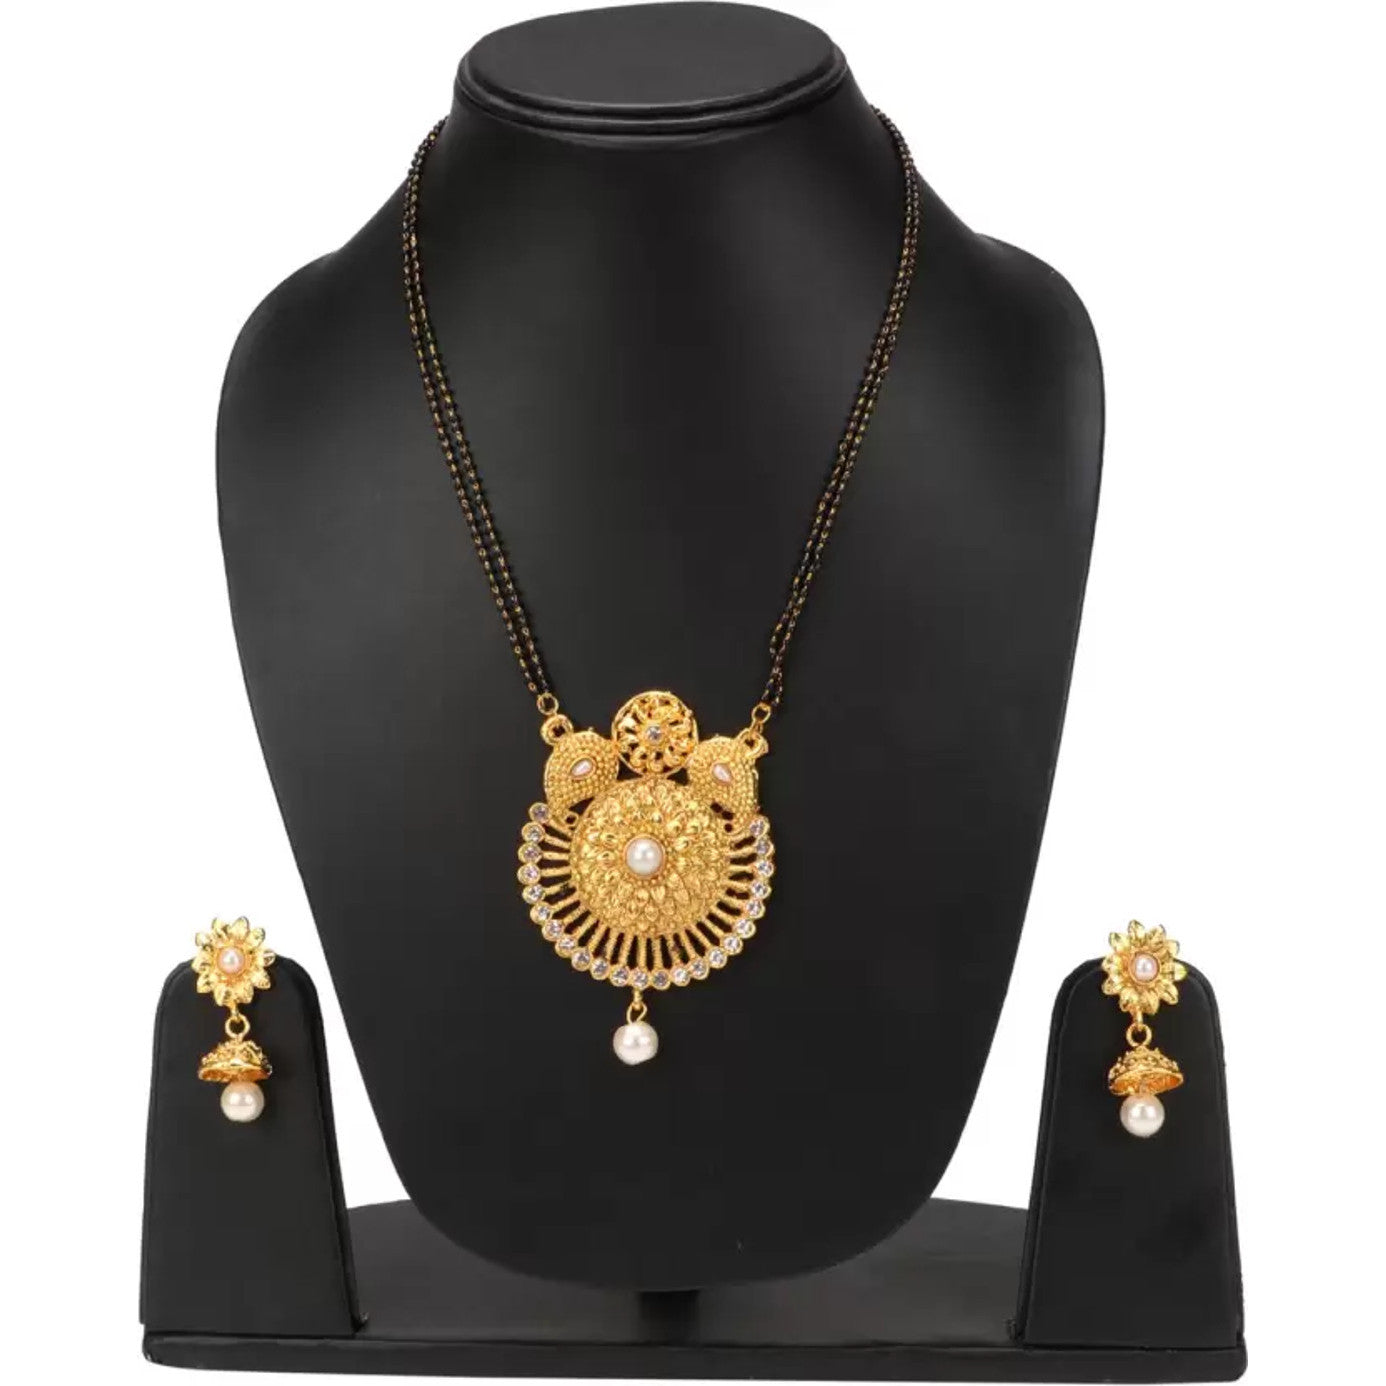 Gold Plated Mangalsutra with Earrings for Women | Buy This Mangalsutra with Earrings Online from Mekkna